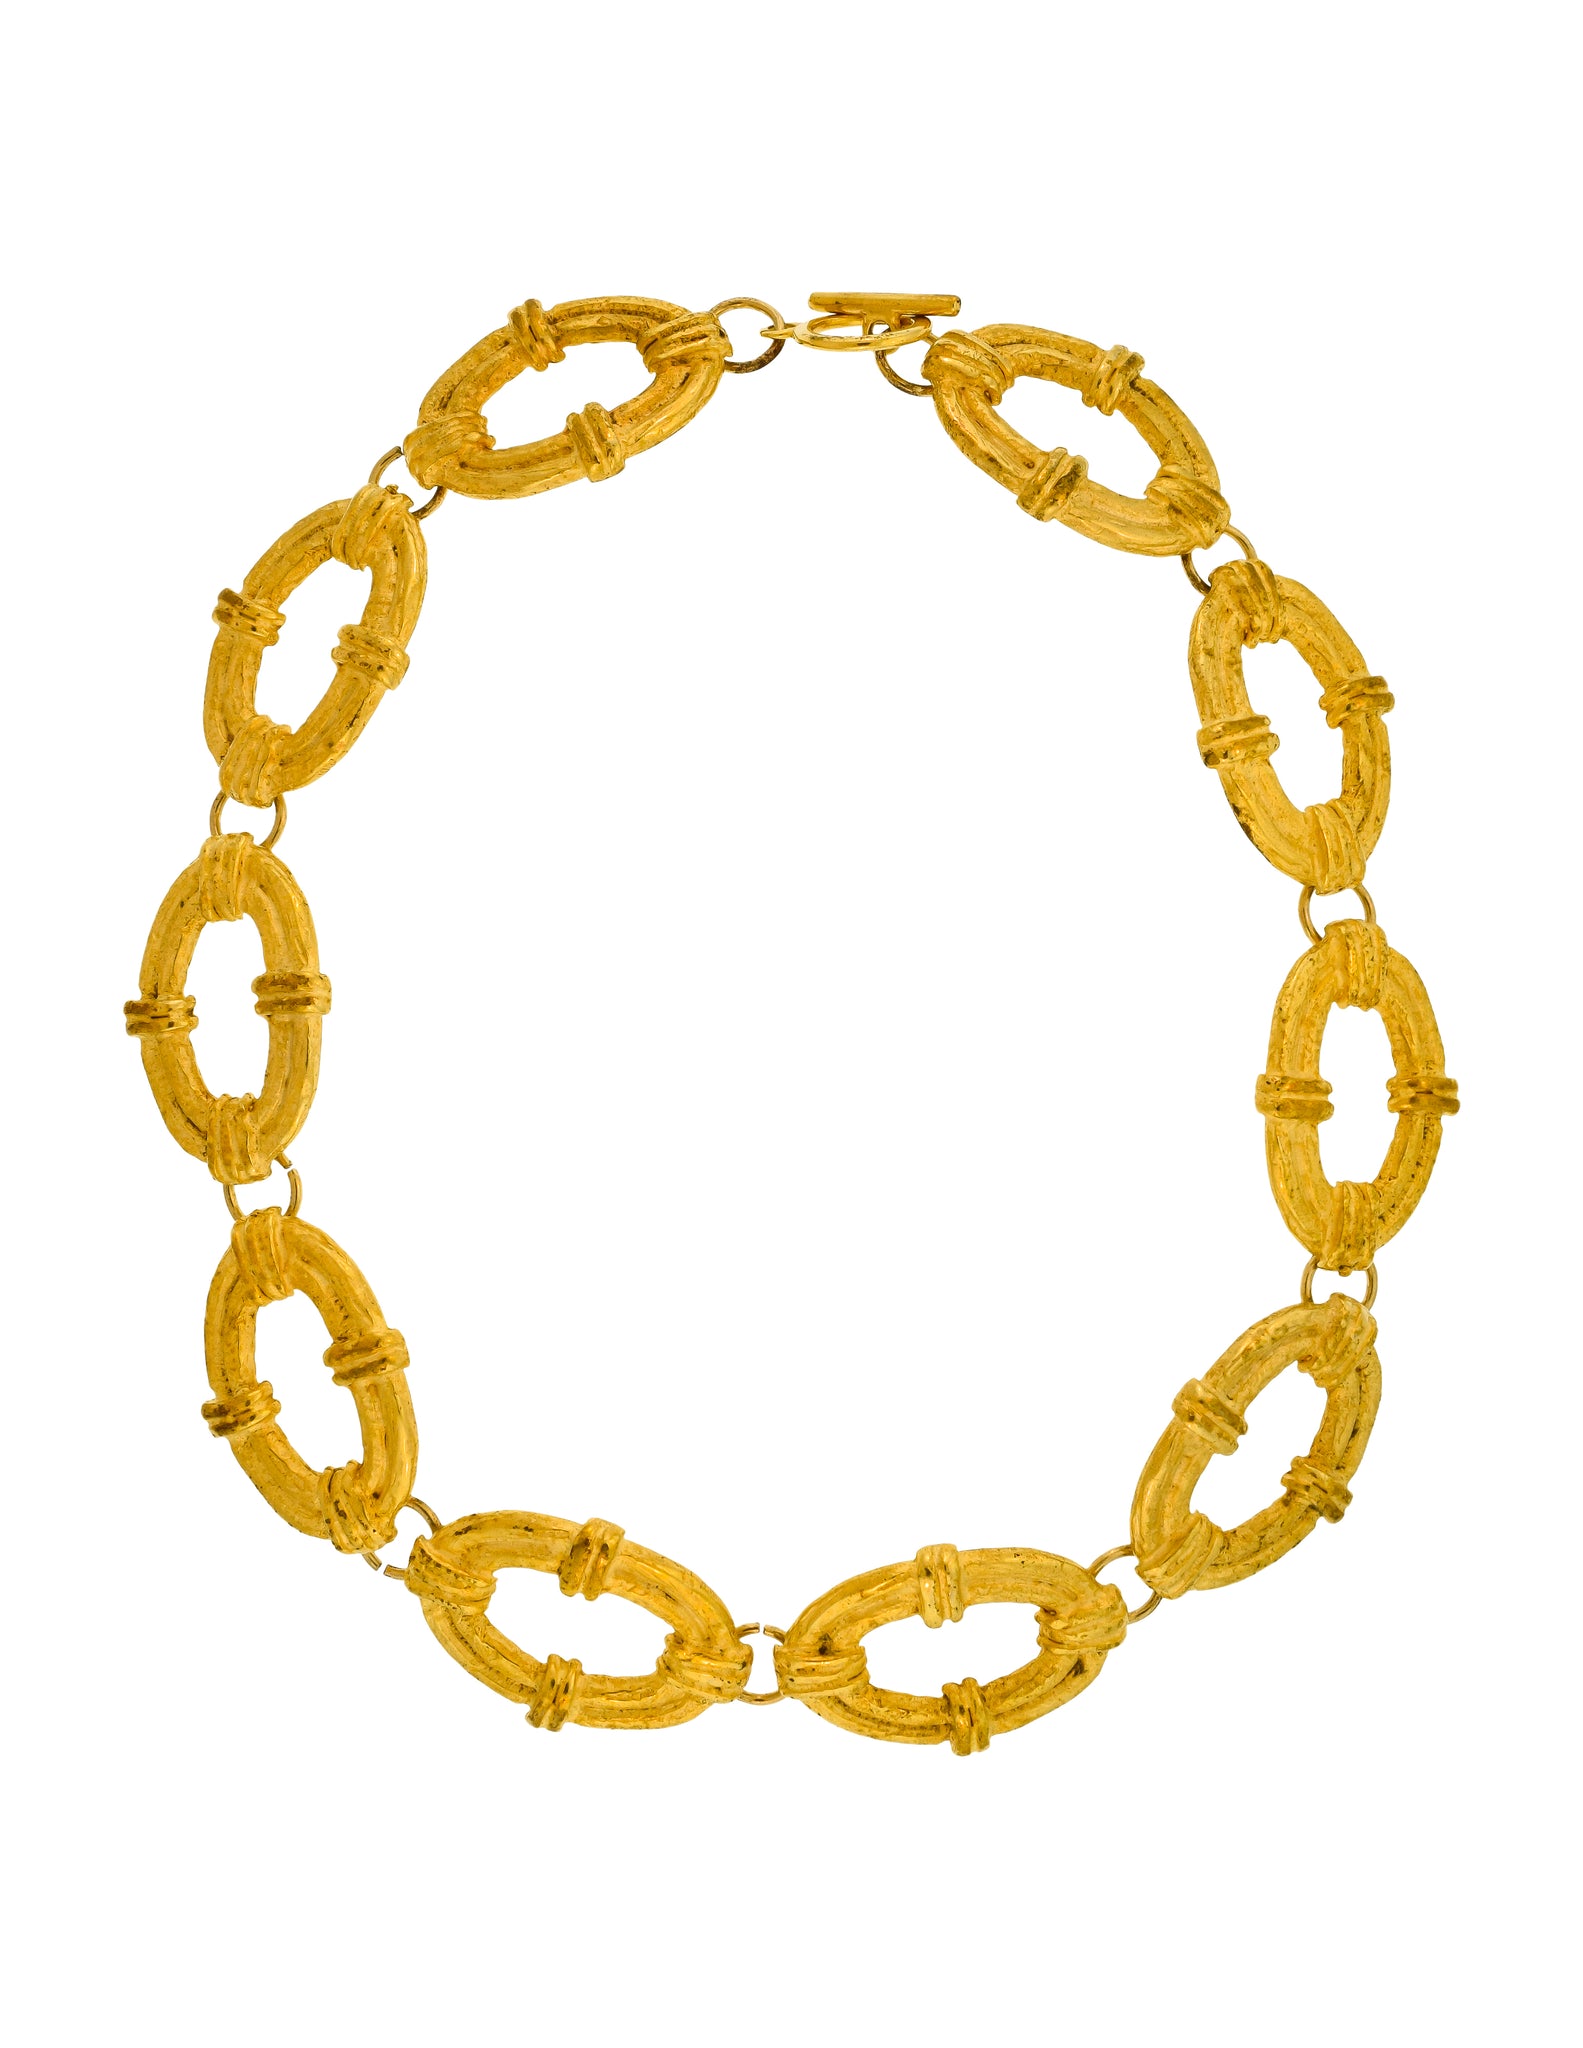 Pierre Cardin Vintage 1980s Artisanal Brushed Gold Textured Oval Link Chain Necklace